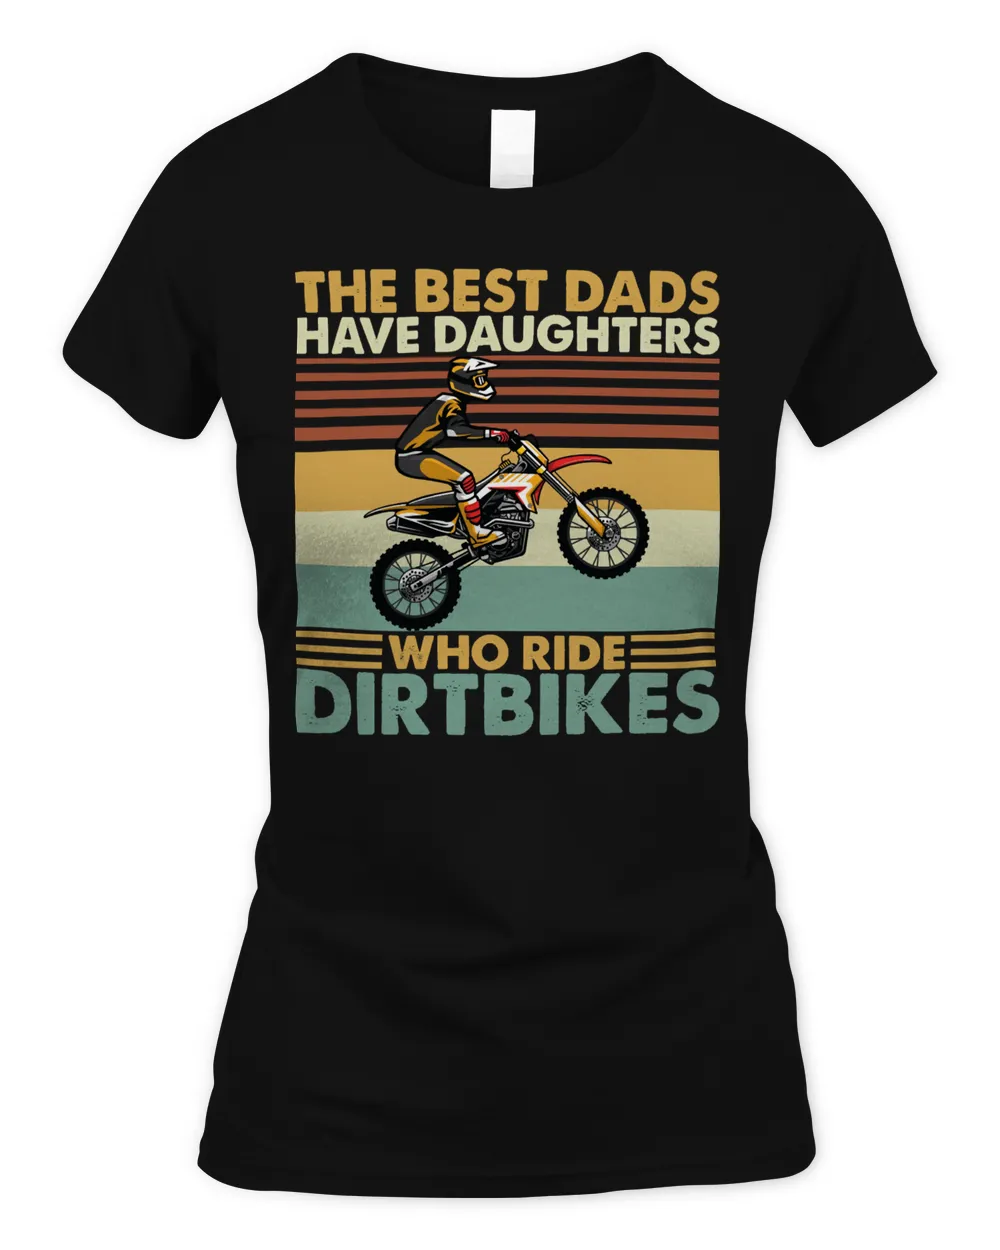 Motocross Rider The Best Dads Have Daughters Who Ride Dirtbikes111 Motorcyclist